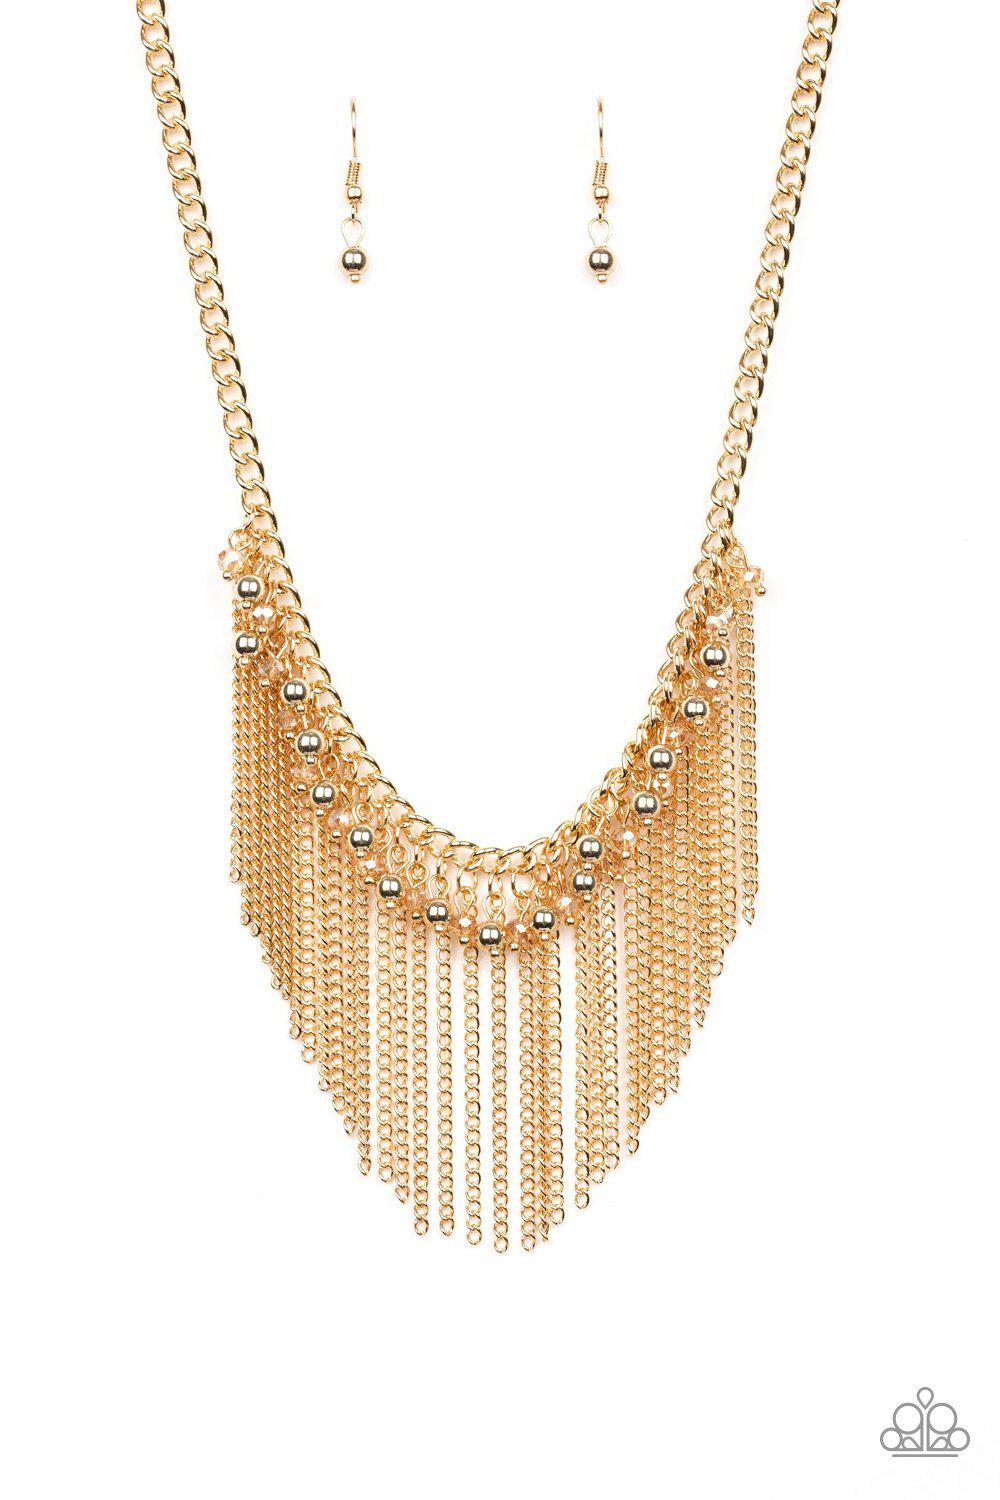 Divinely Diva Gold Fringe Necklace - Paparazzi Accessories - lightbox -CarasShop.com - $5 Jewelry by Cara Jewels